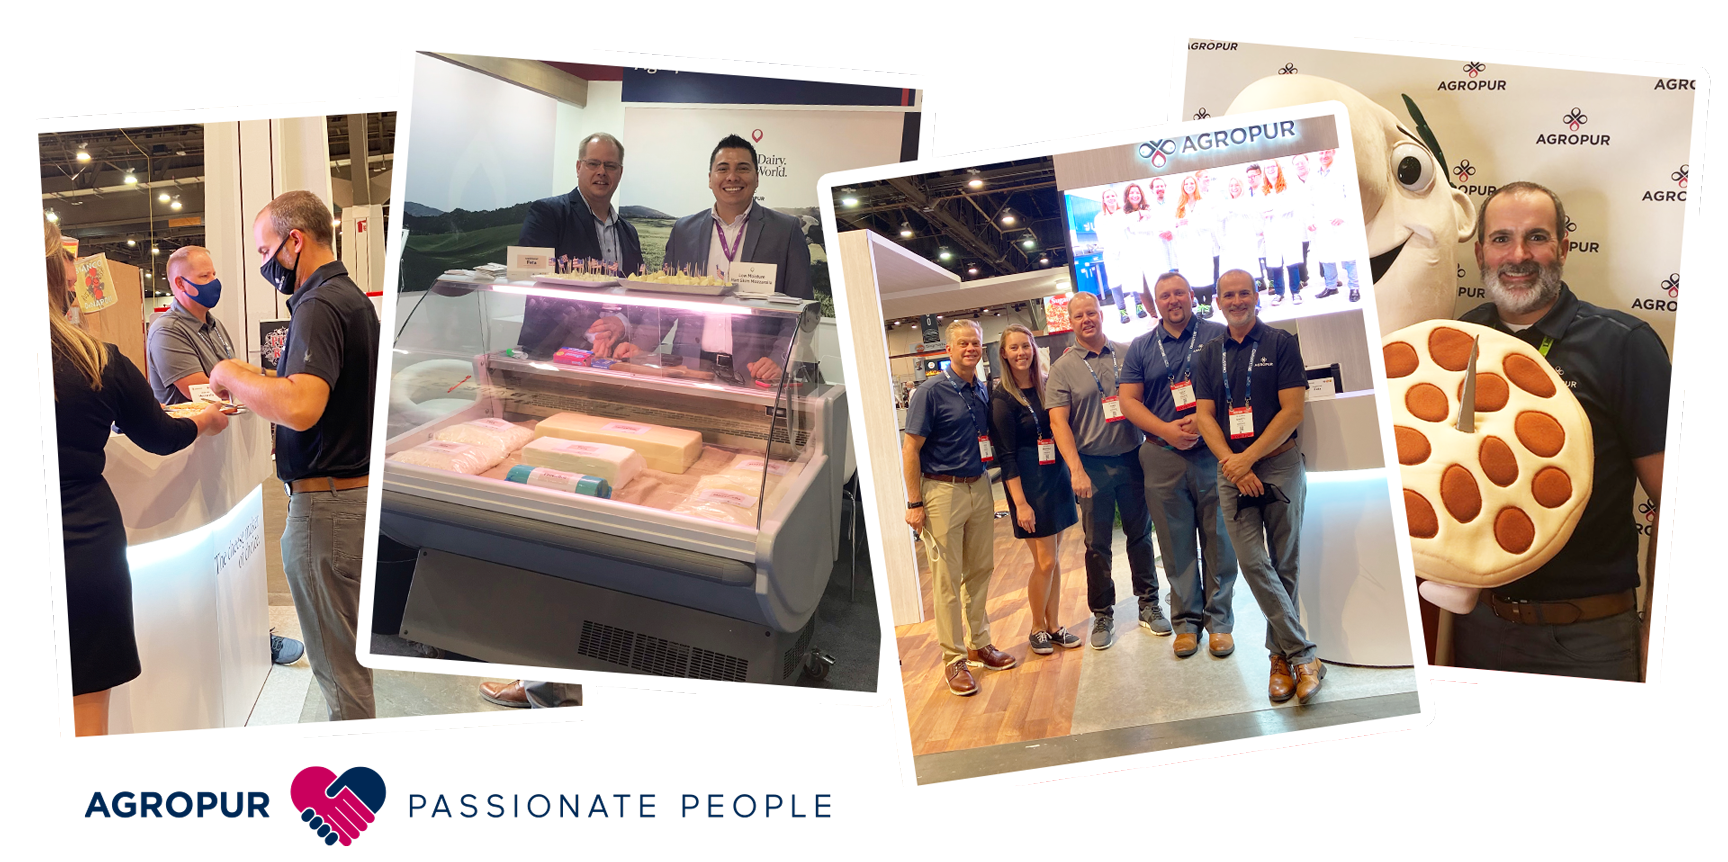 Agropur’s sales team is passionate about our customer’s success